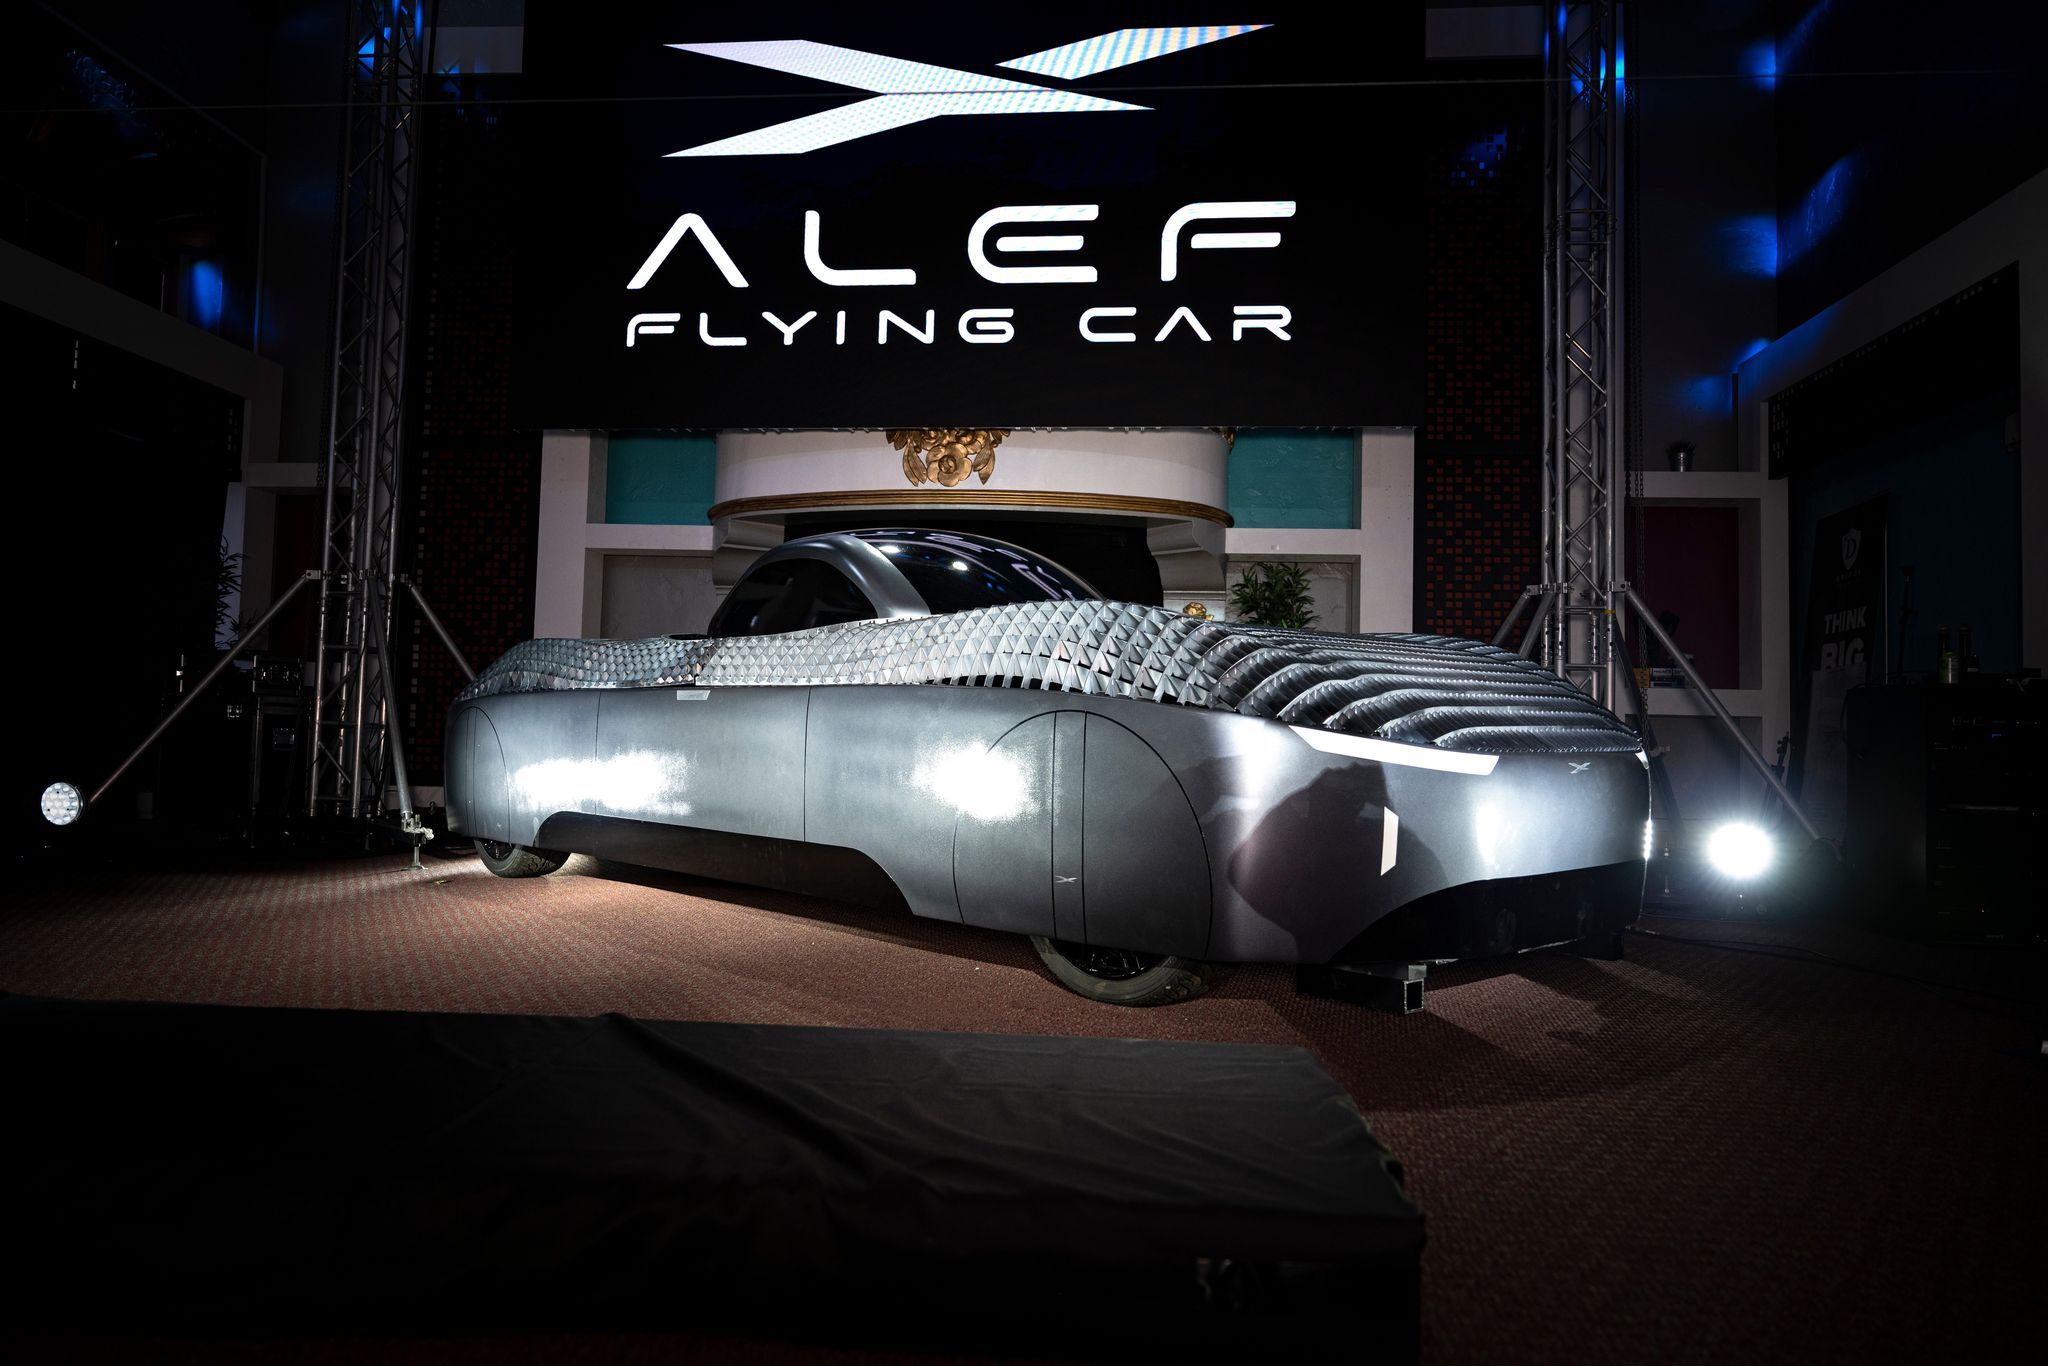 Alef Aeronautics: SpaceX backed firm has nearly 3,000 pre-orders for flying car